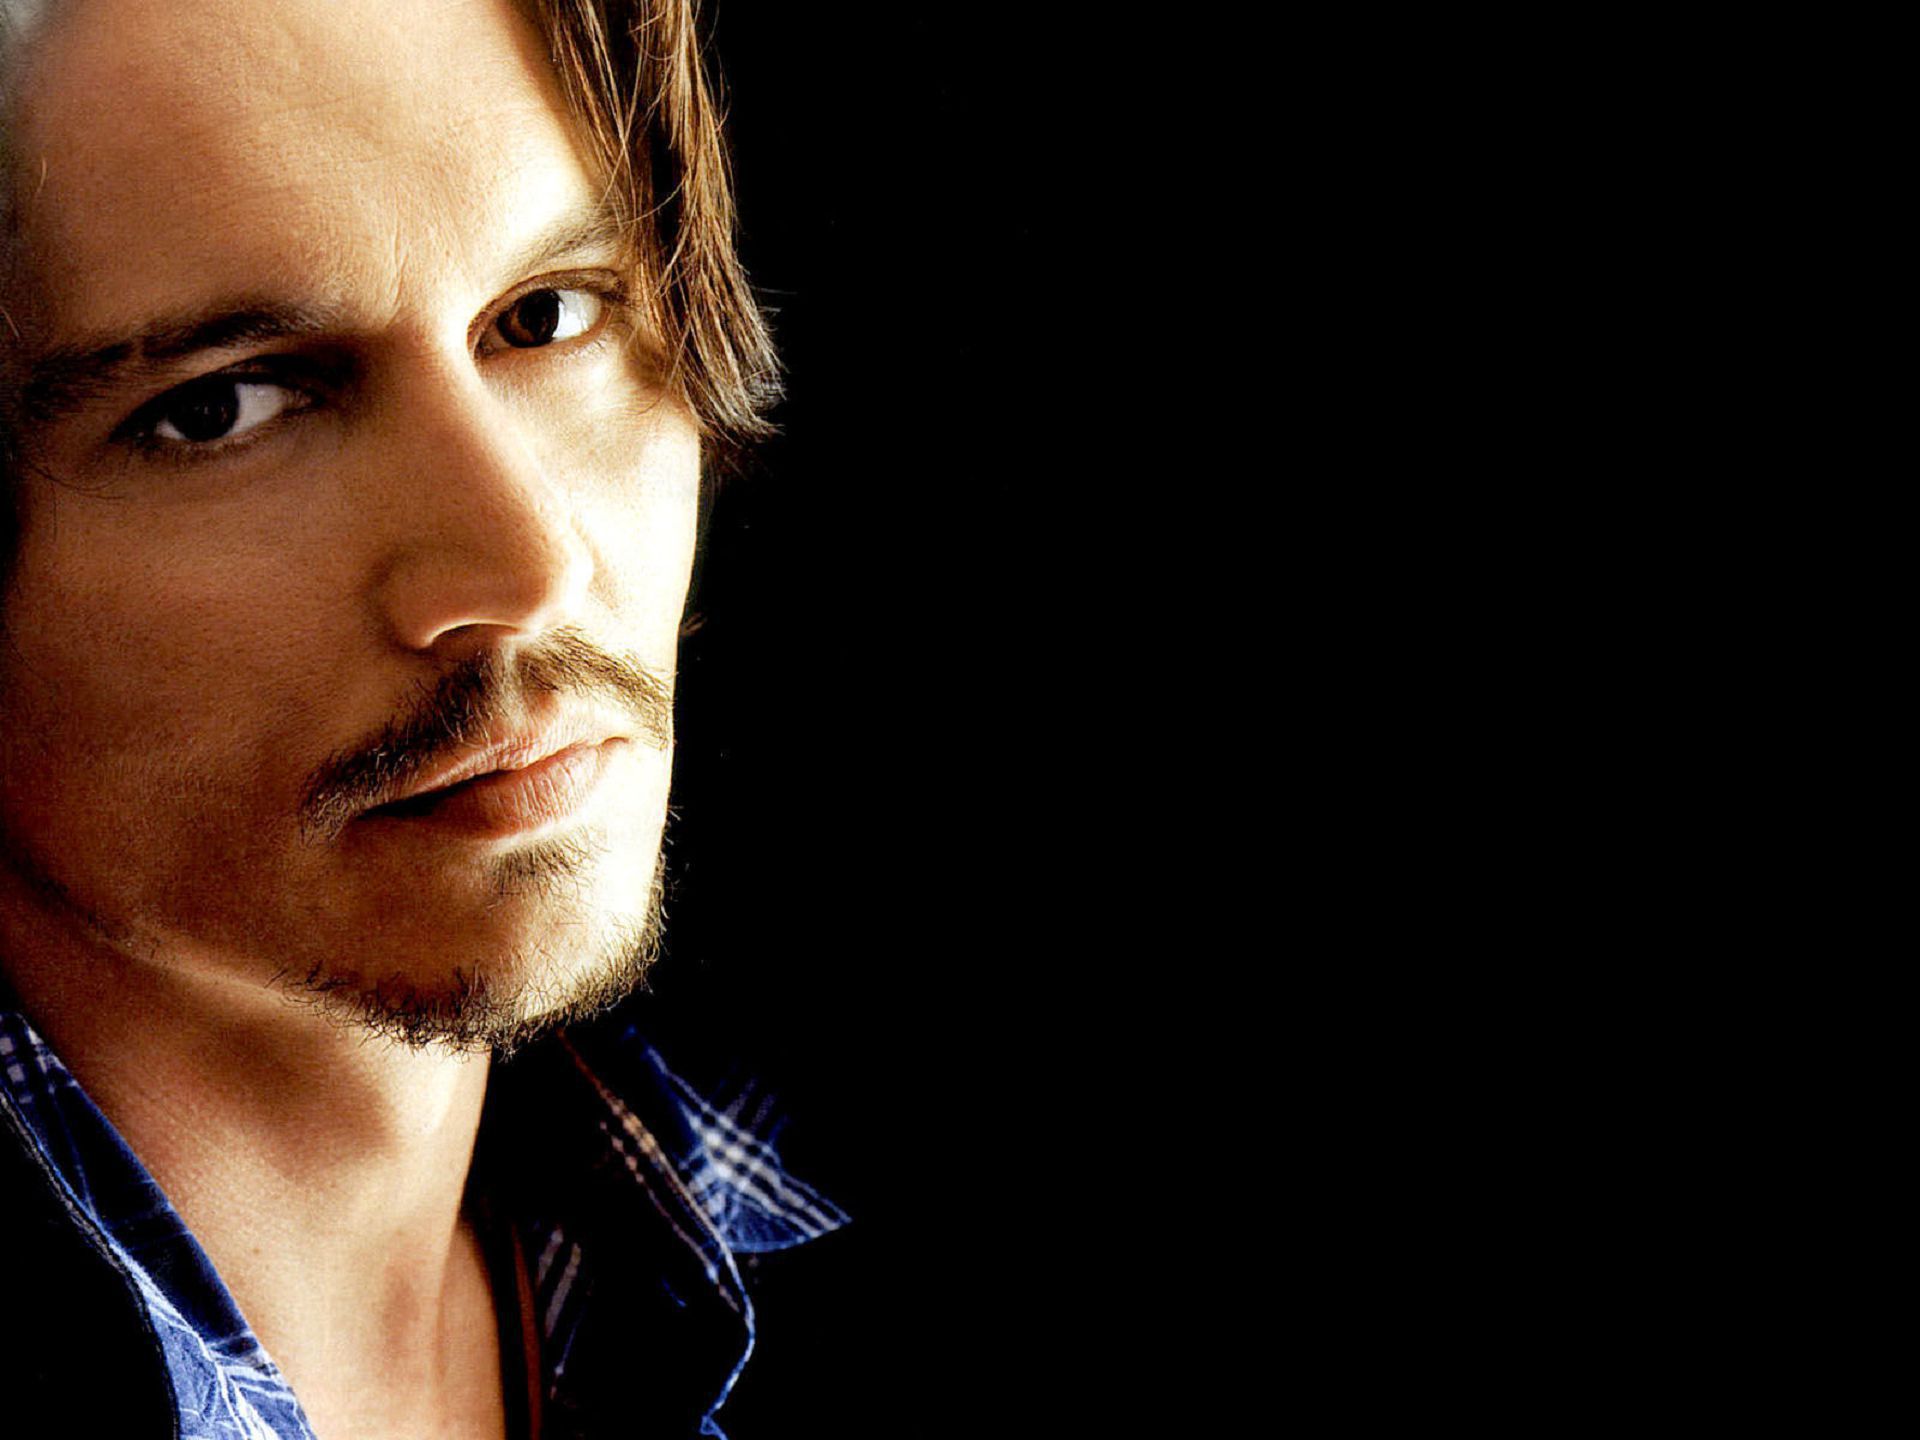 Johnny Depp High Quality Wallpapers